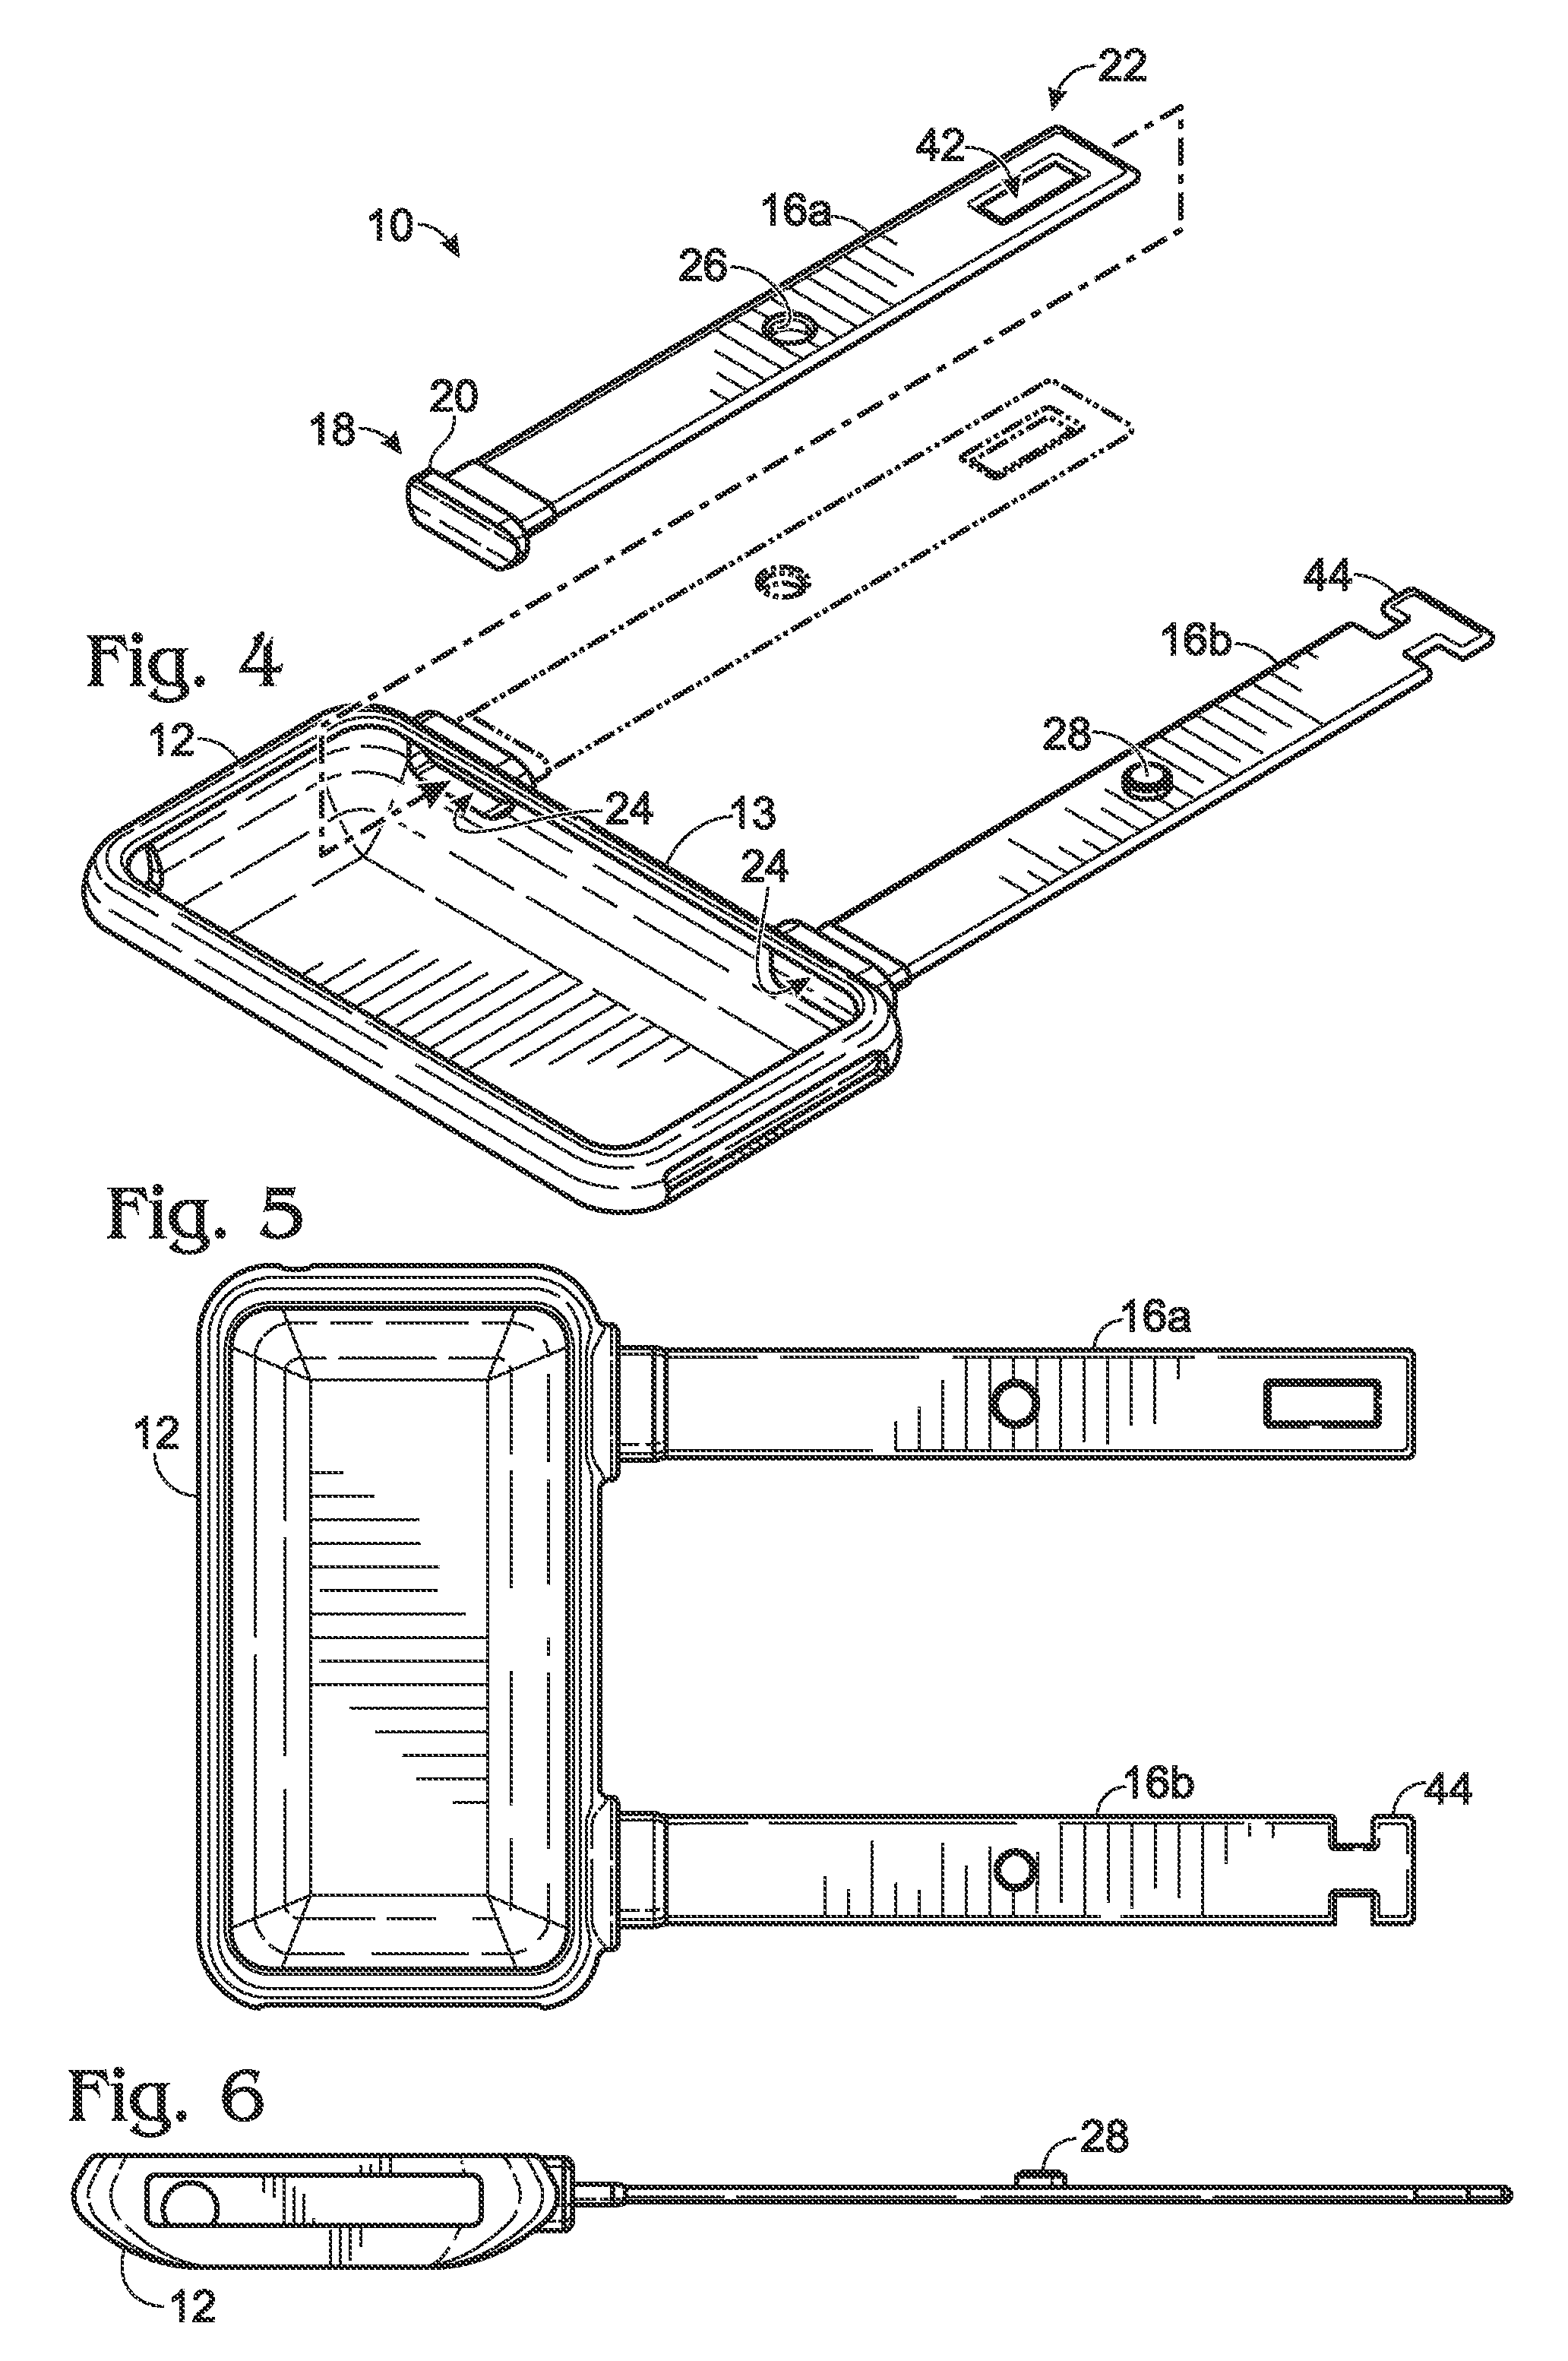 In-flight Case for Portable Audio Visual Device